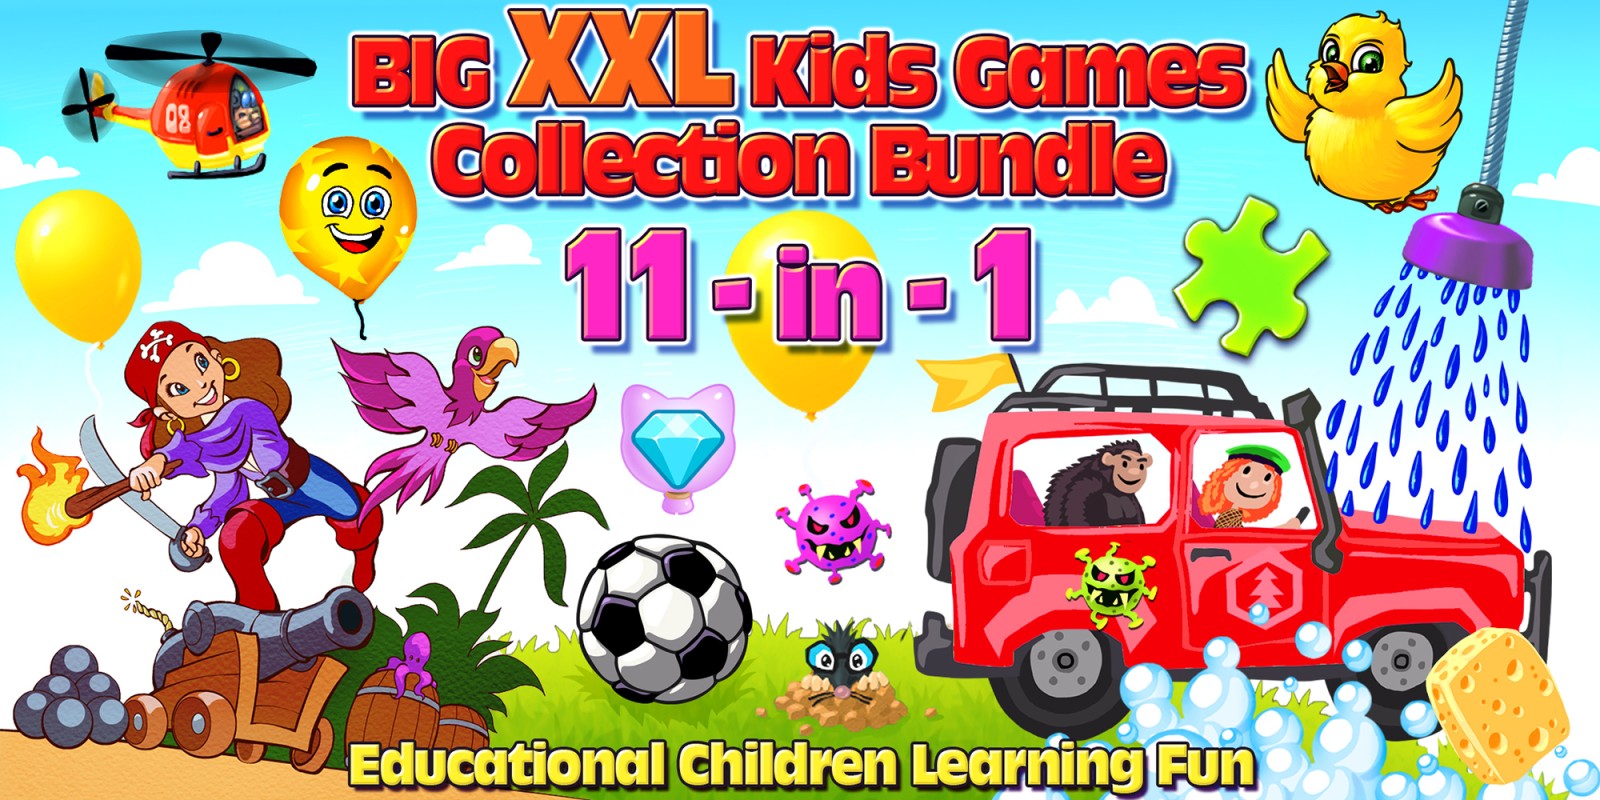 Big XXL Kids Games Collection Bundle 11-in-1 Educational Children Learning Fun